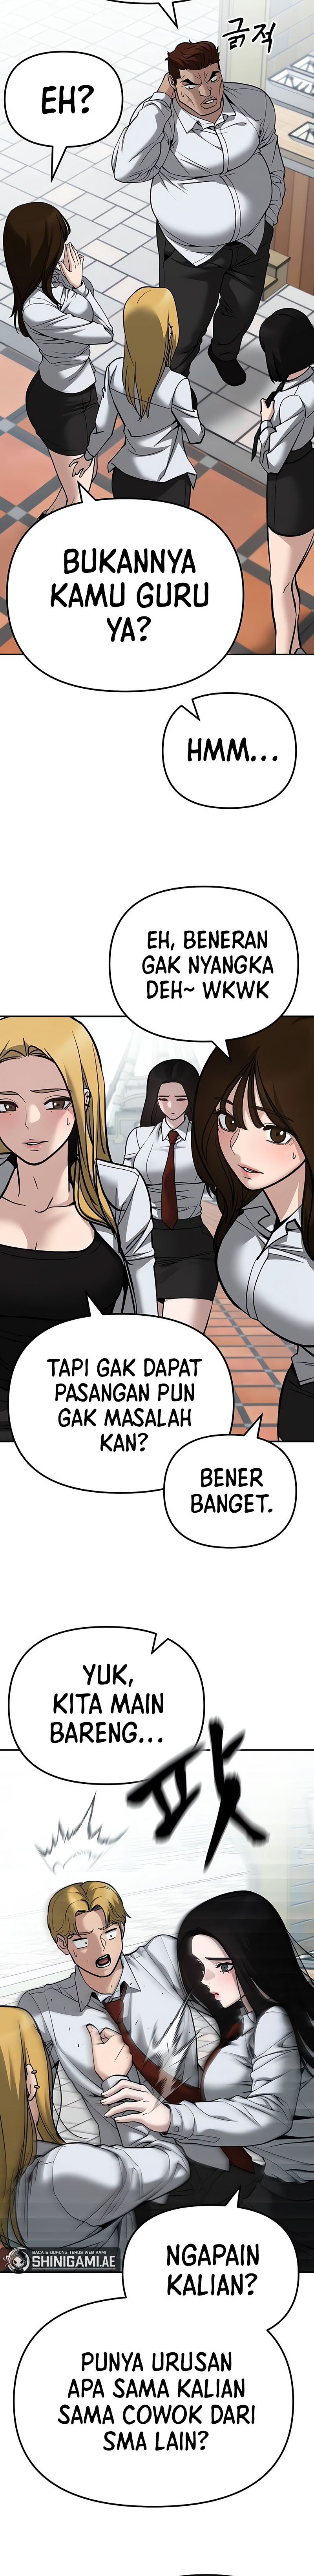 the-bully-in-charge Chapter 90